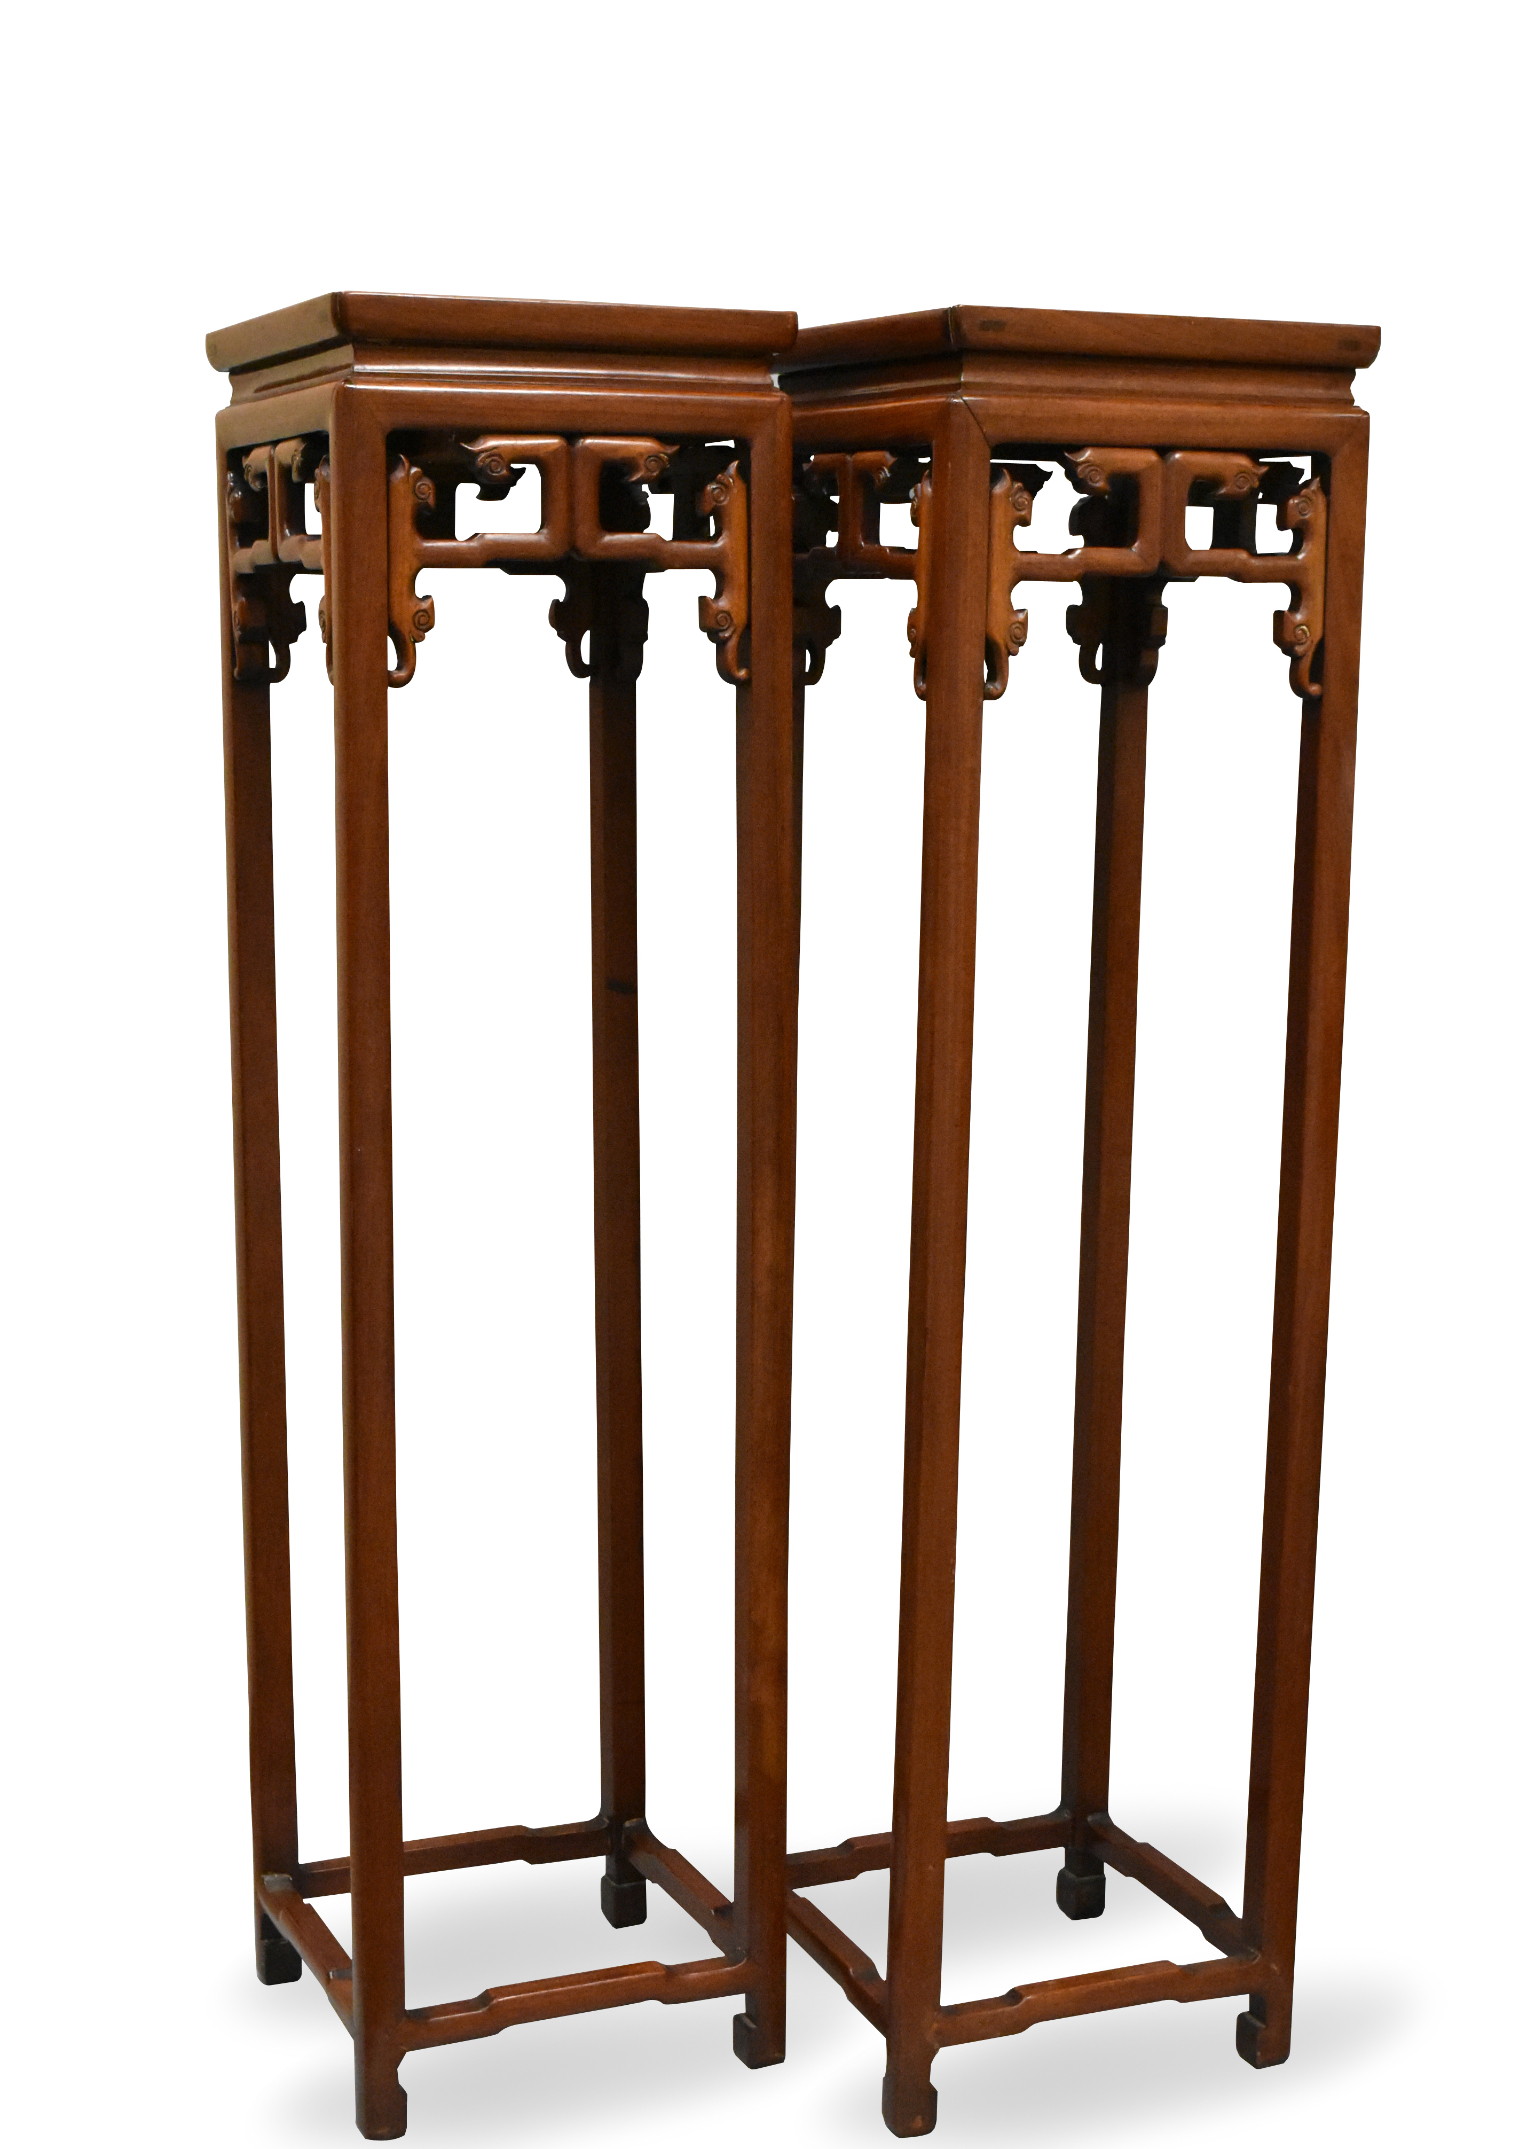 PAIR OF TALL CHINESE WOOD STANDS  339e68